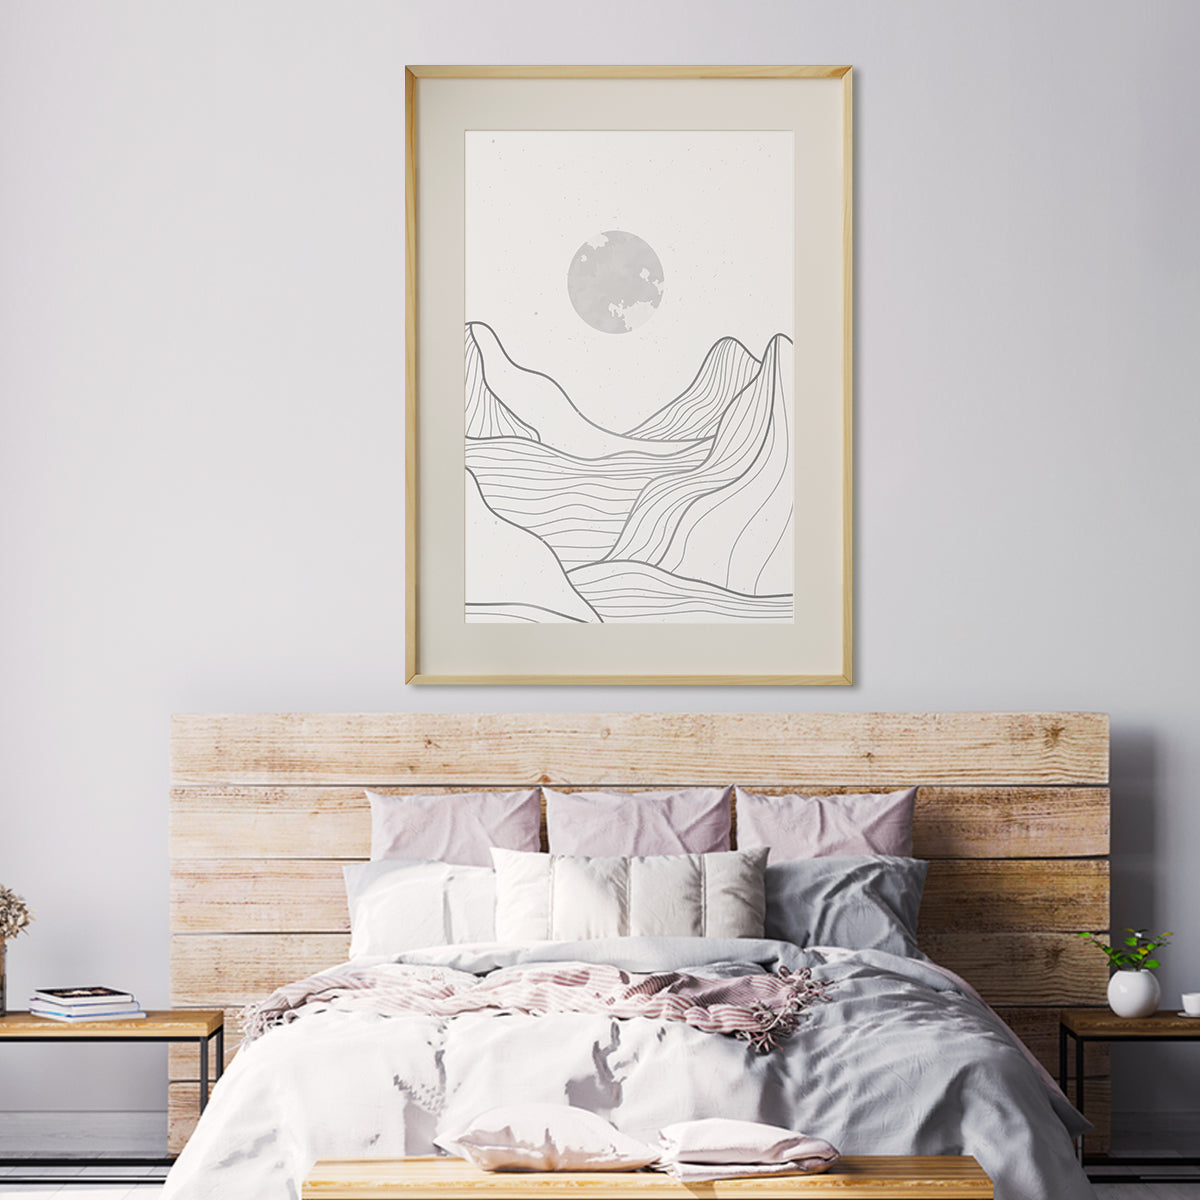 Mountain Landscapes Line Art Minimalist Posters For Wall Decor-Vertical Posters NOT FRAMED-CetArt-8″x10″ inches-CetArt